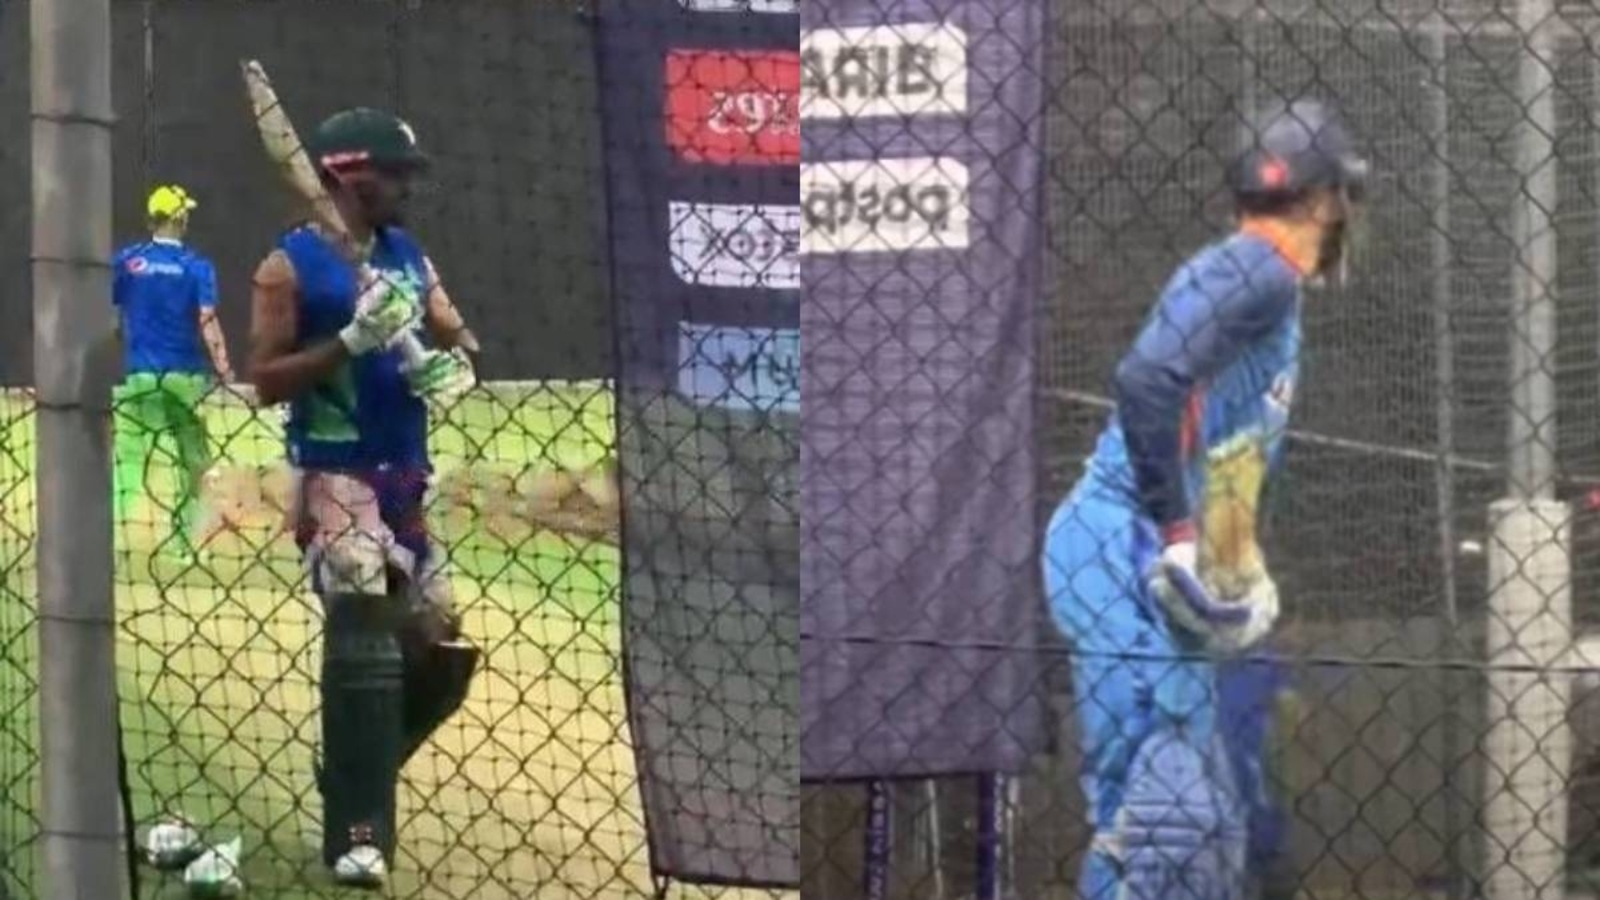 watch-kohli-joins-babar-at-nets-as-ex-india-captain-practices-with-pakistan-team-moments-after-t20wc-warm-up-tie-vs-aus